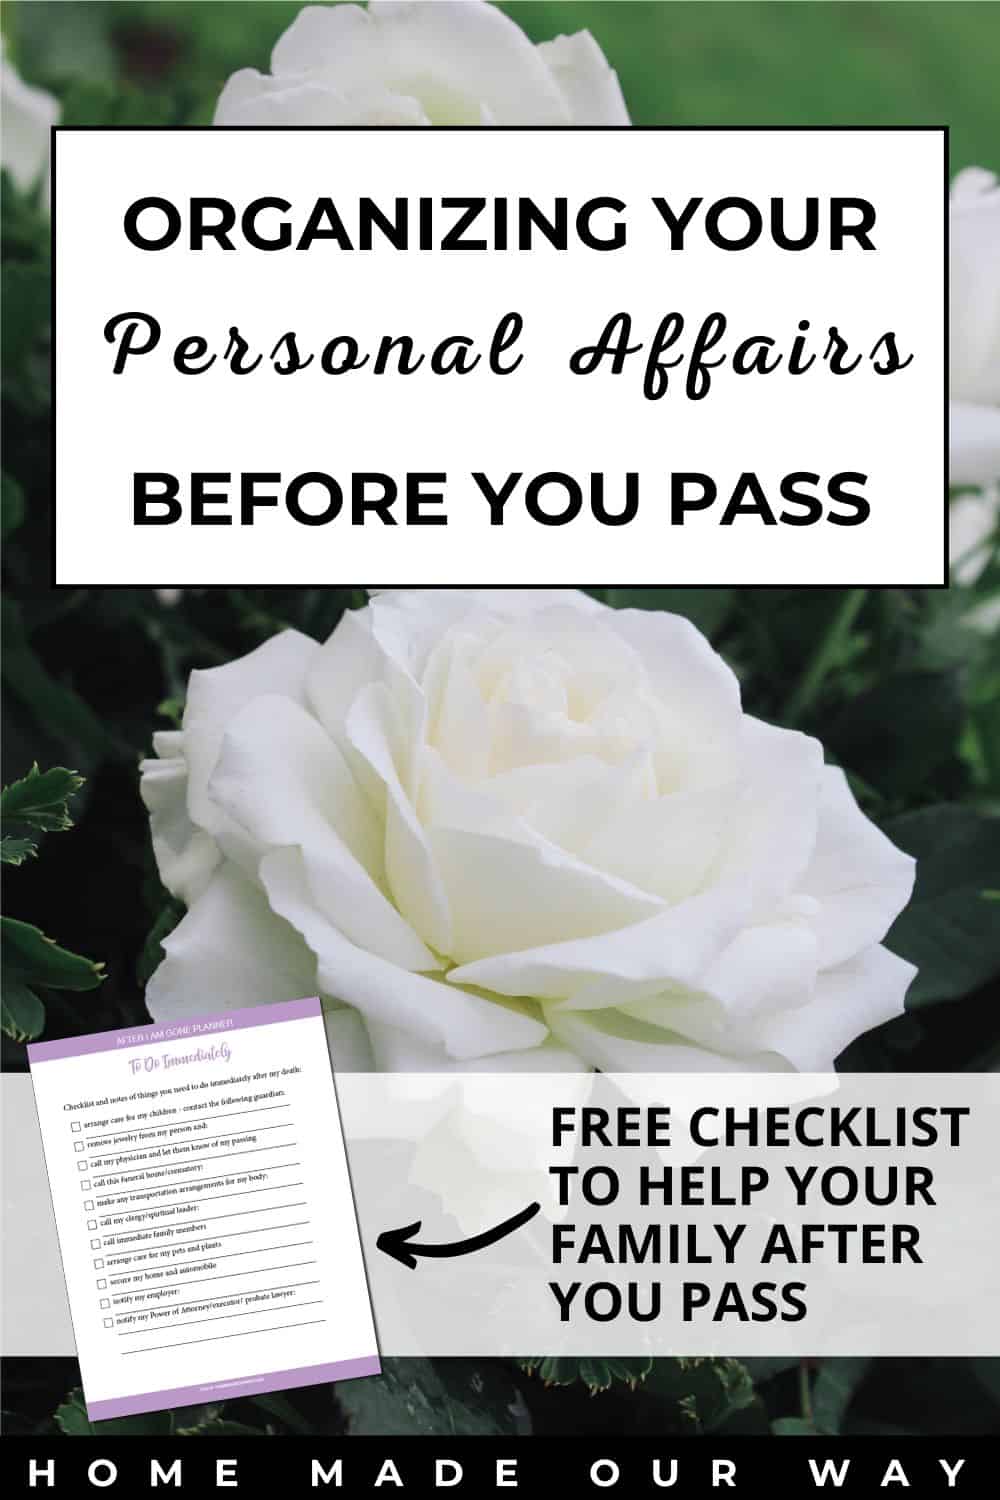 organizing your personal affairs before you pass and free checklist